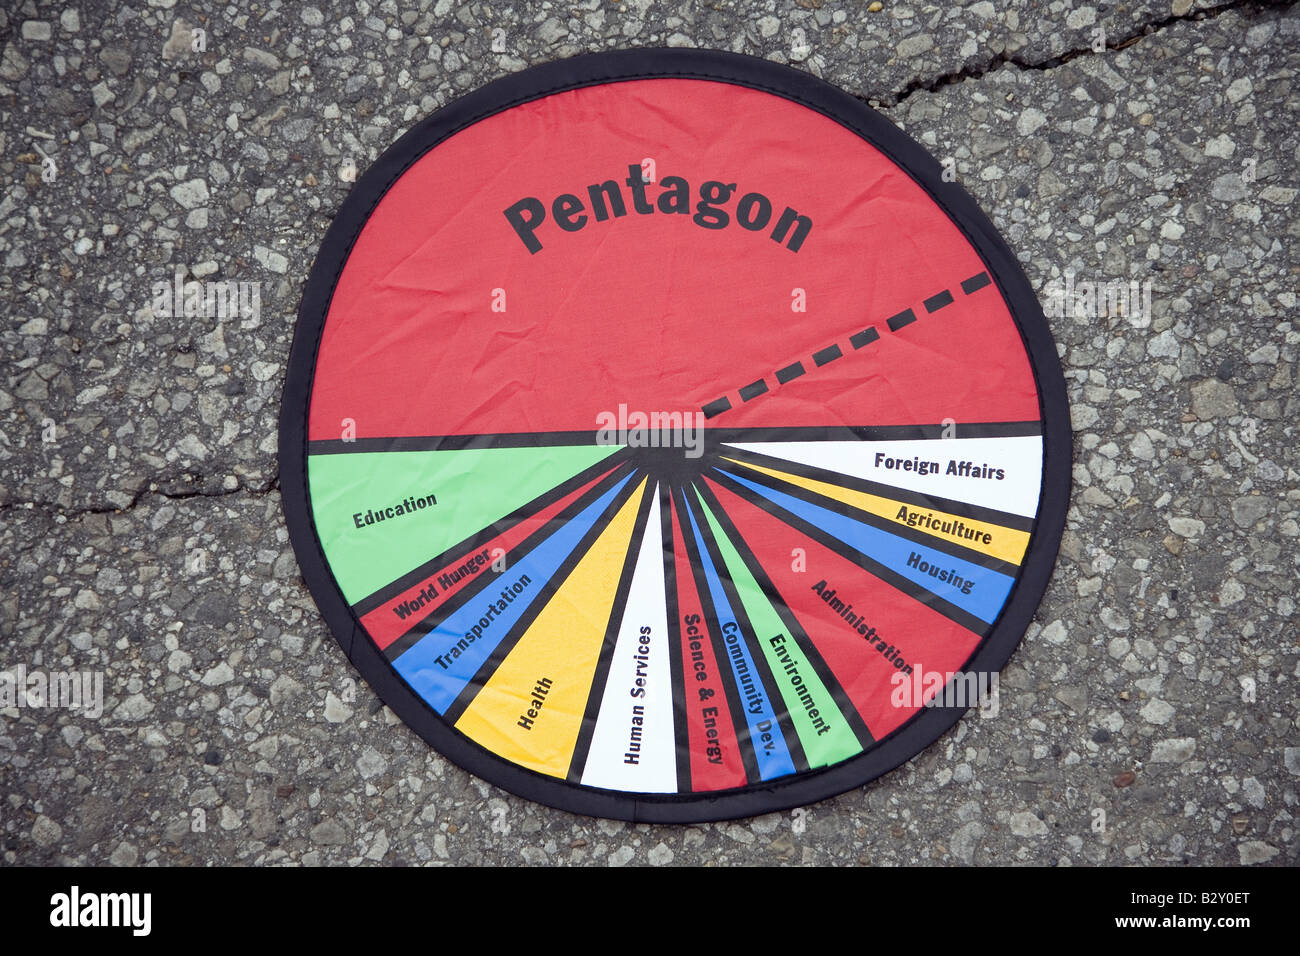 US budget on a frisbee, showing that Pentagon budget is more than 50% of US budget, Des Moines, Iowa, 2007 Stock Photo